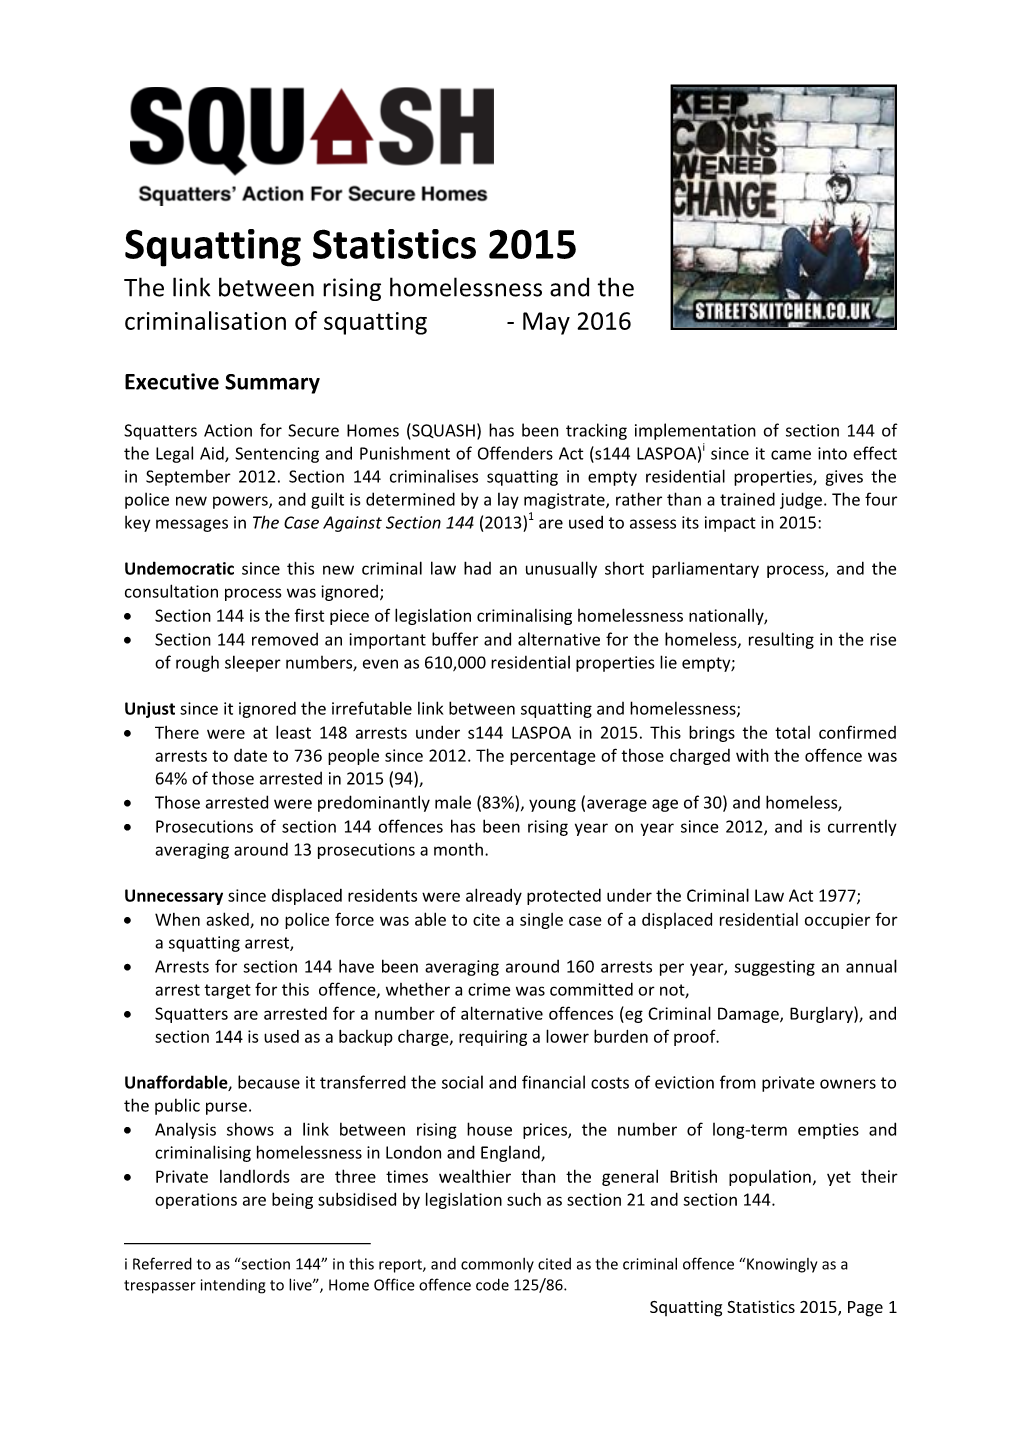 Squatting Statistics 2015 the Link Between Rising Homelessness and the Criminalisation of Squatting - May 2016